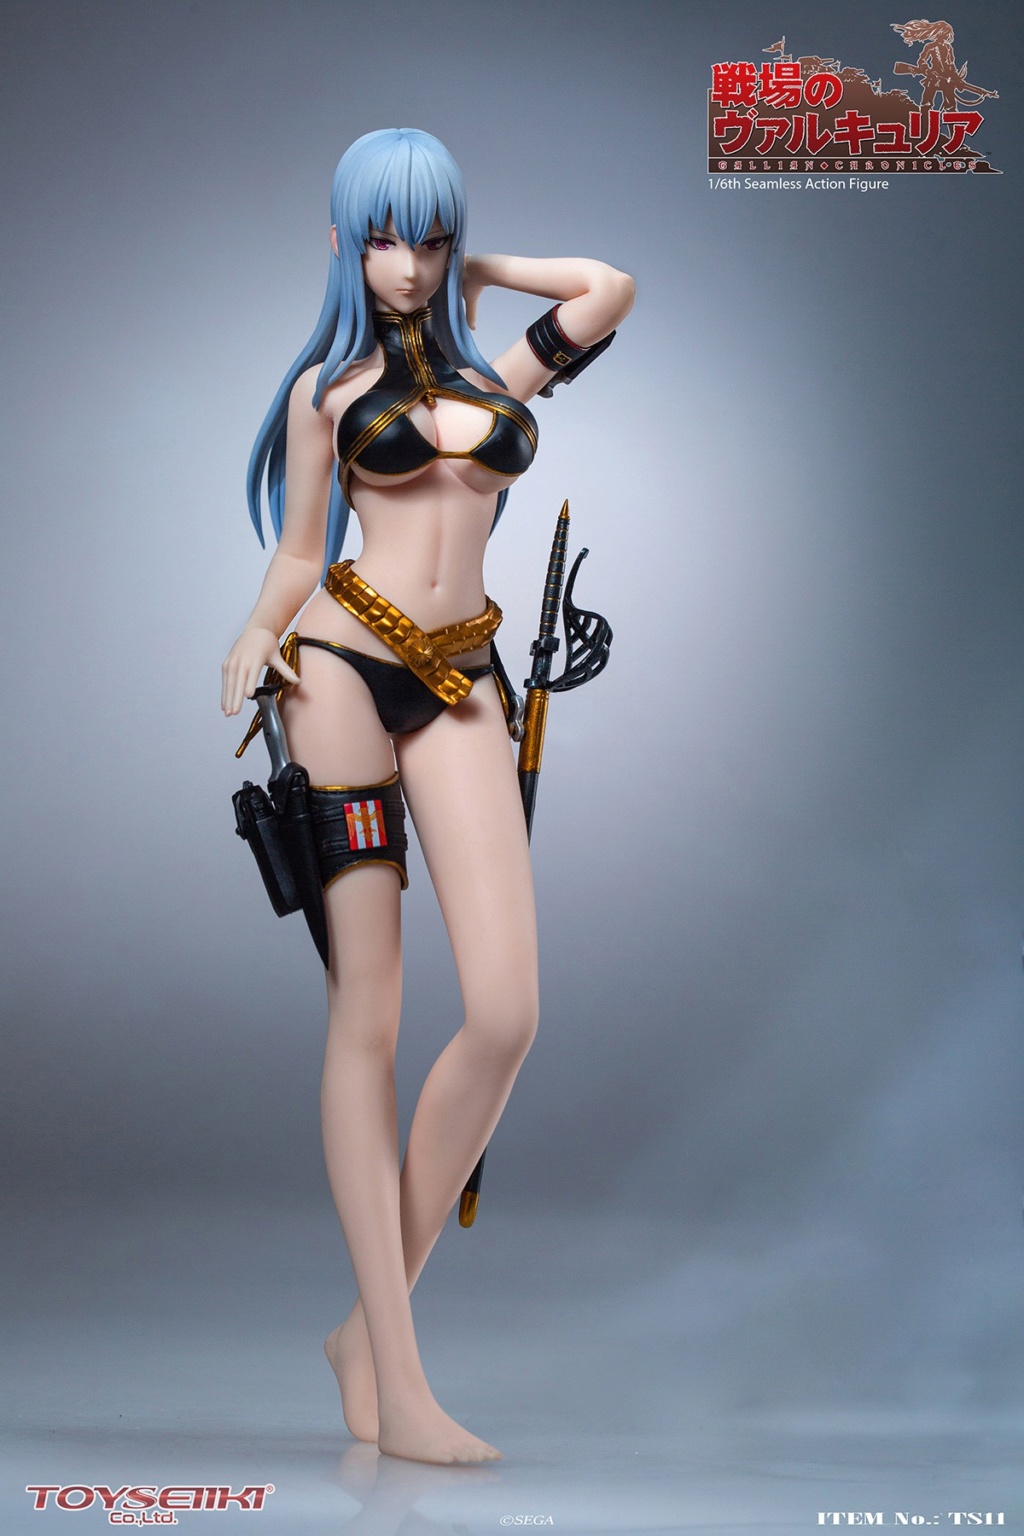 SelvariaBles - NEW PRODUCT: TOYSEIIKI: 1/6 "The Valkyrie of the Battlefield"- Selvaria Bles Action Figure (# TS11) 12000410